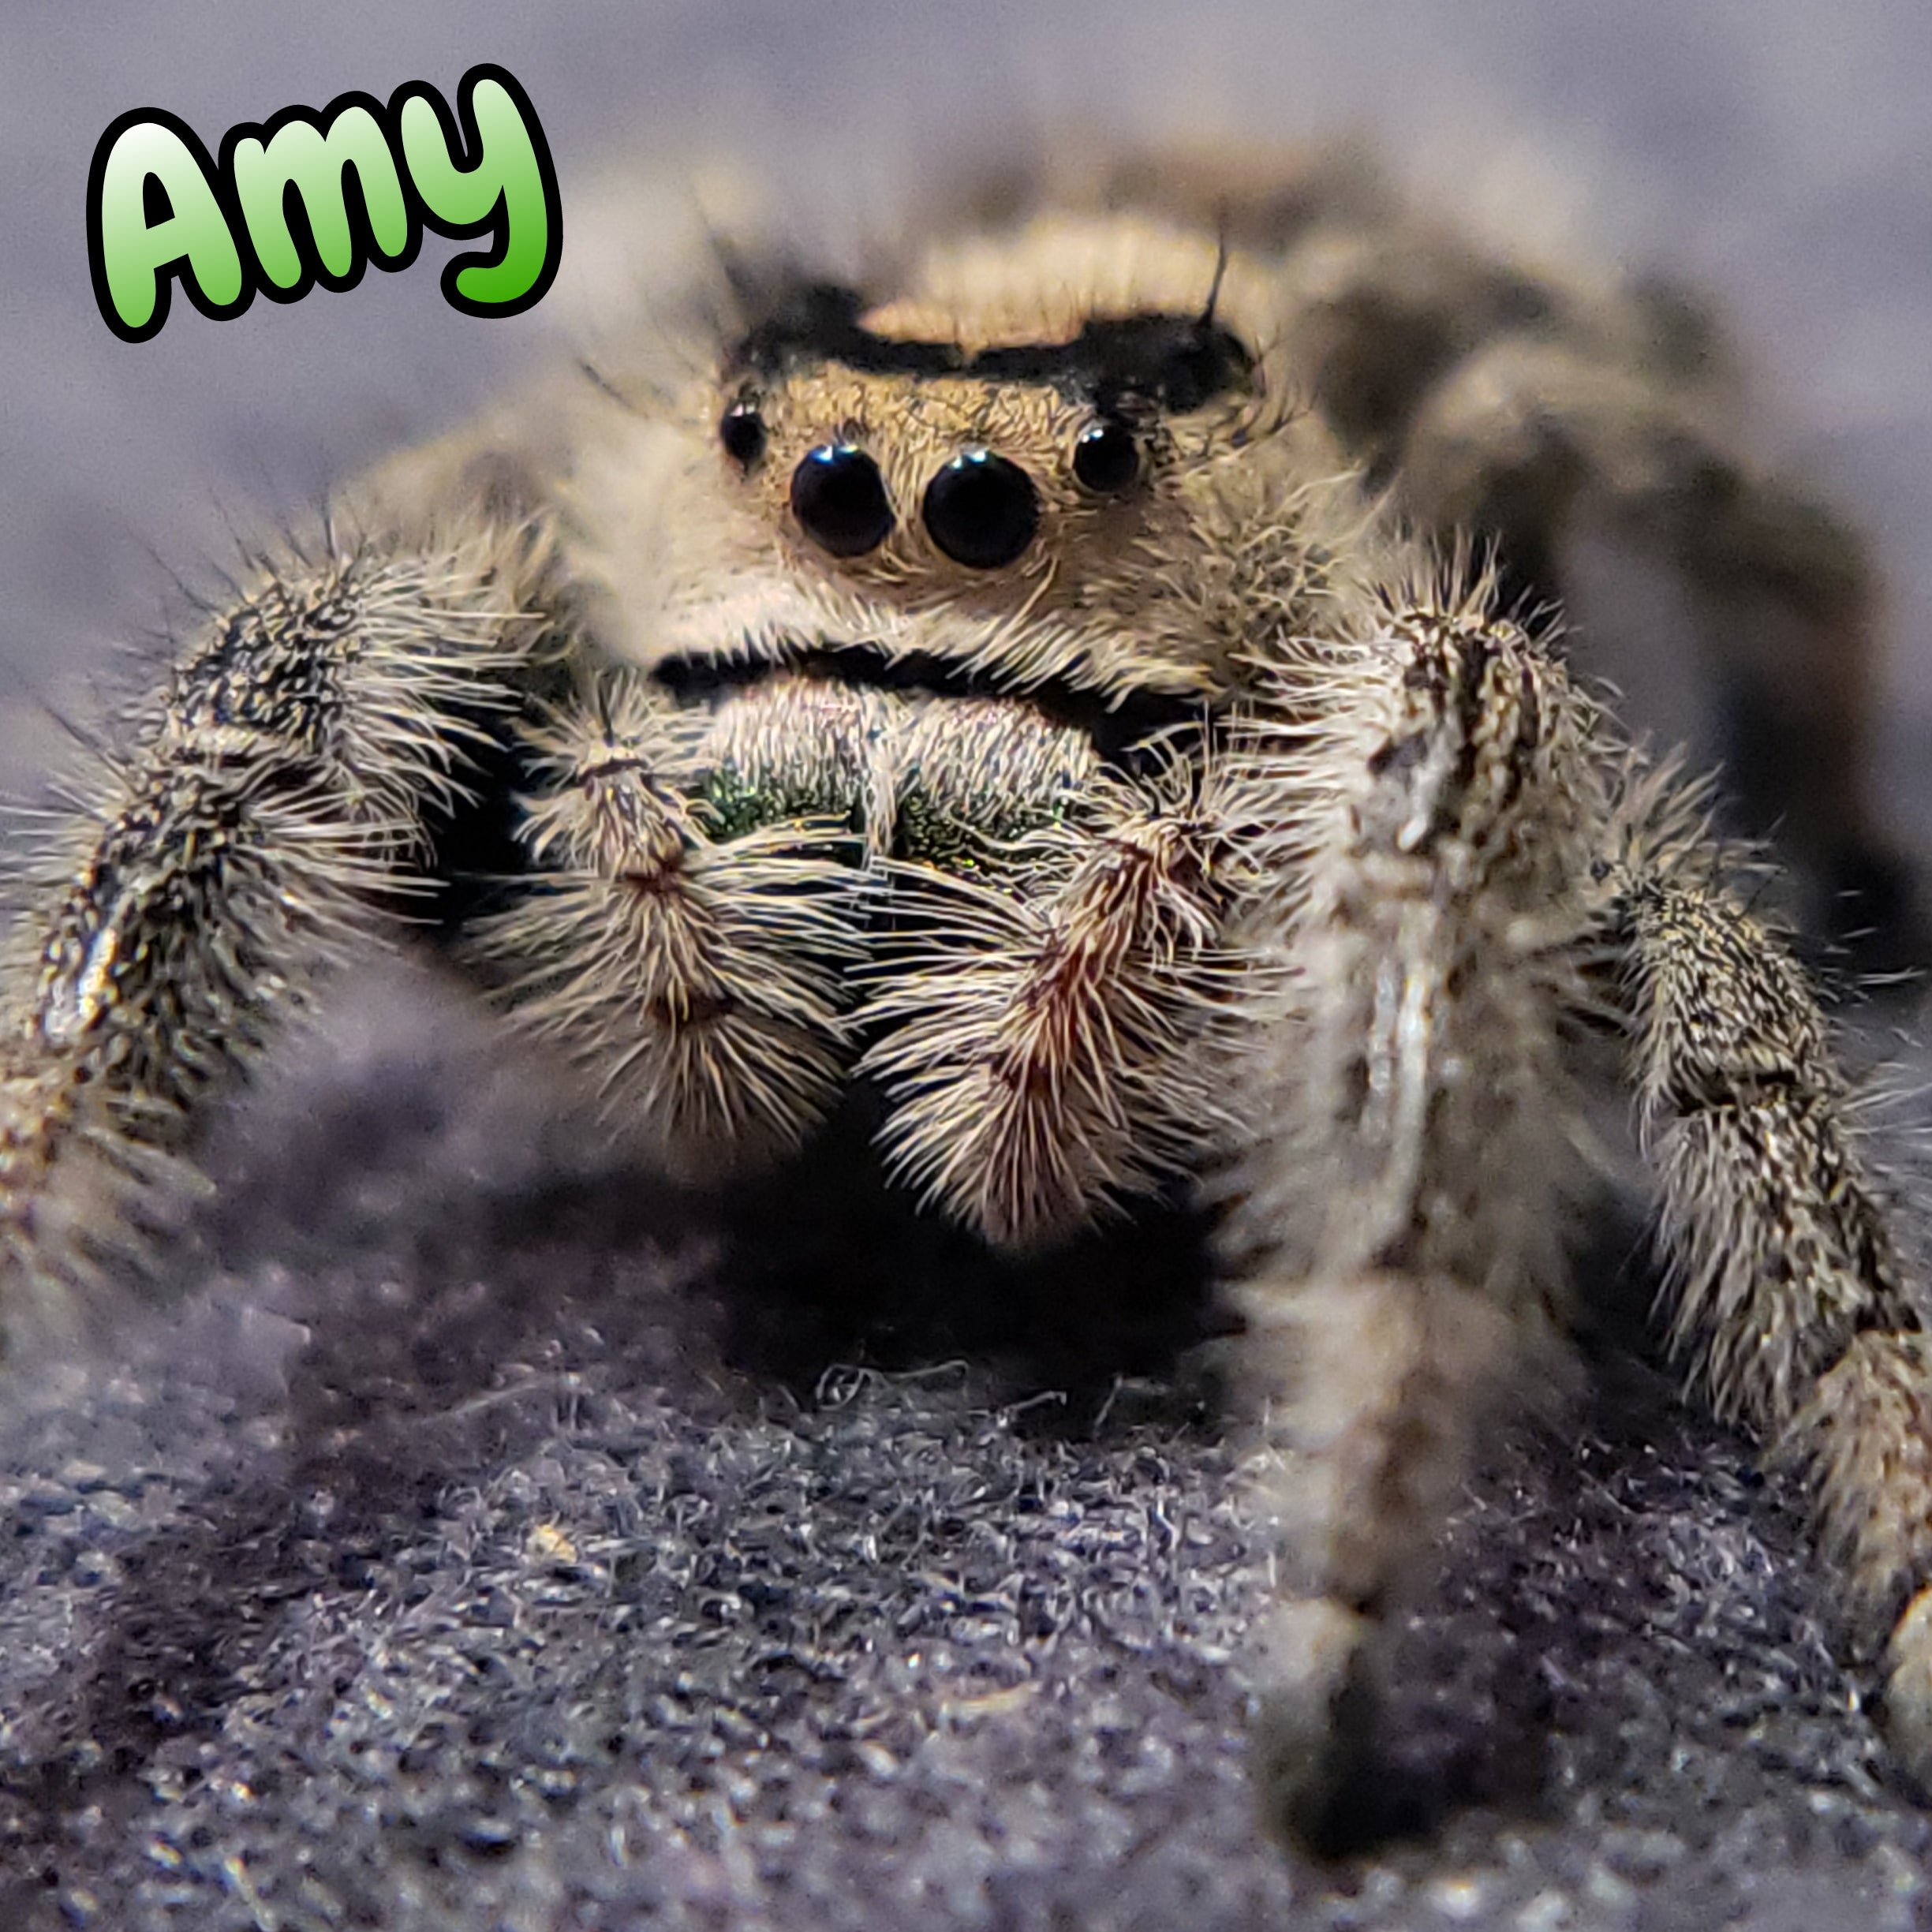 Regal Jumping Spider "Amy"